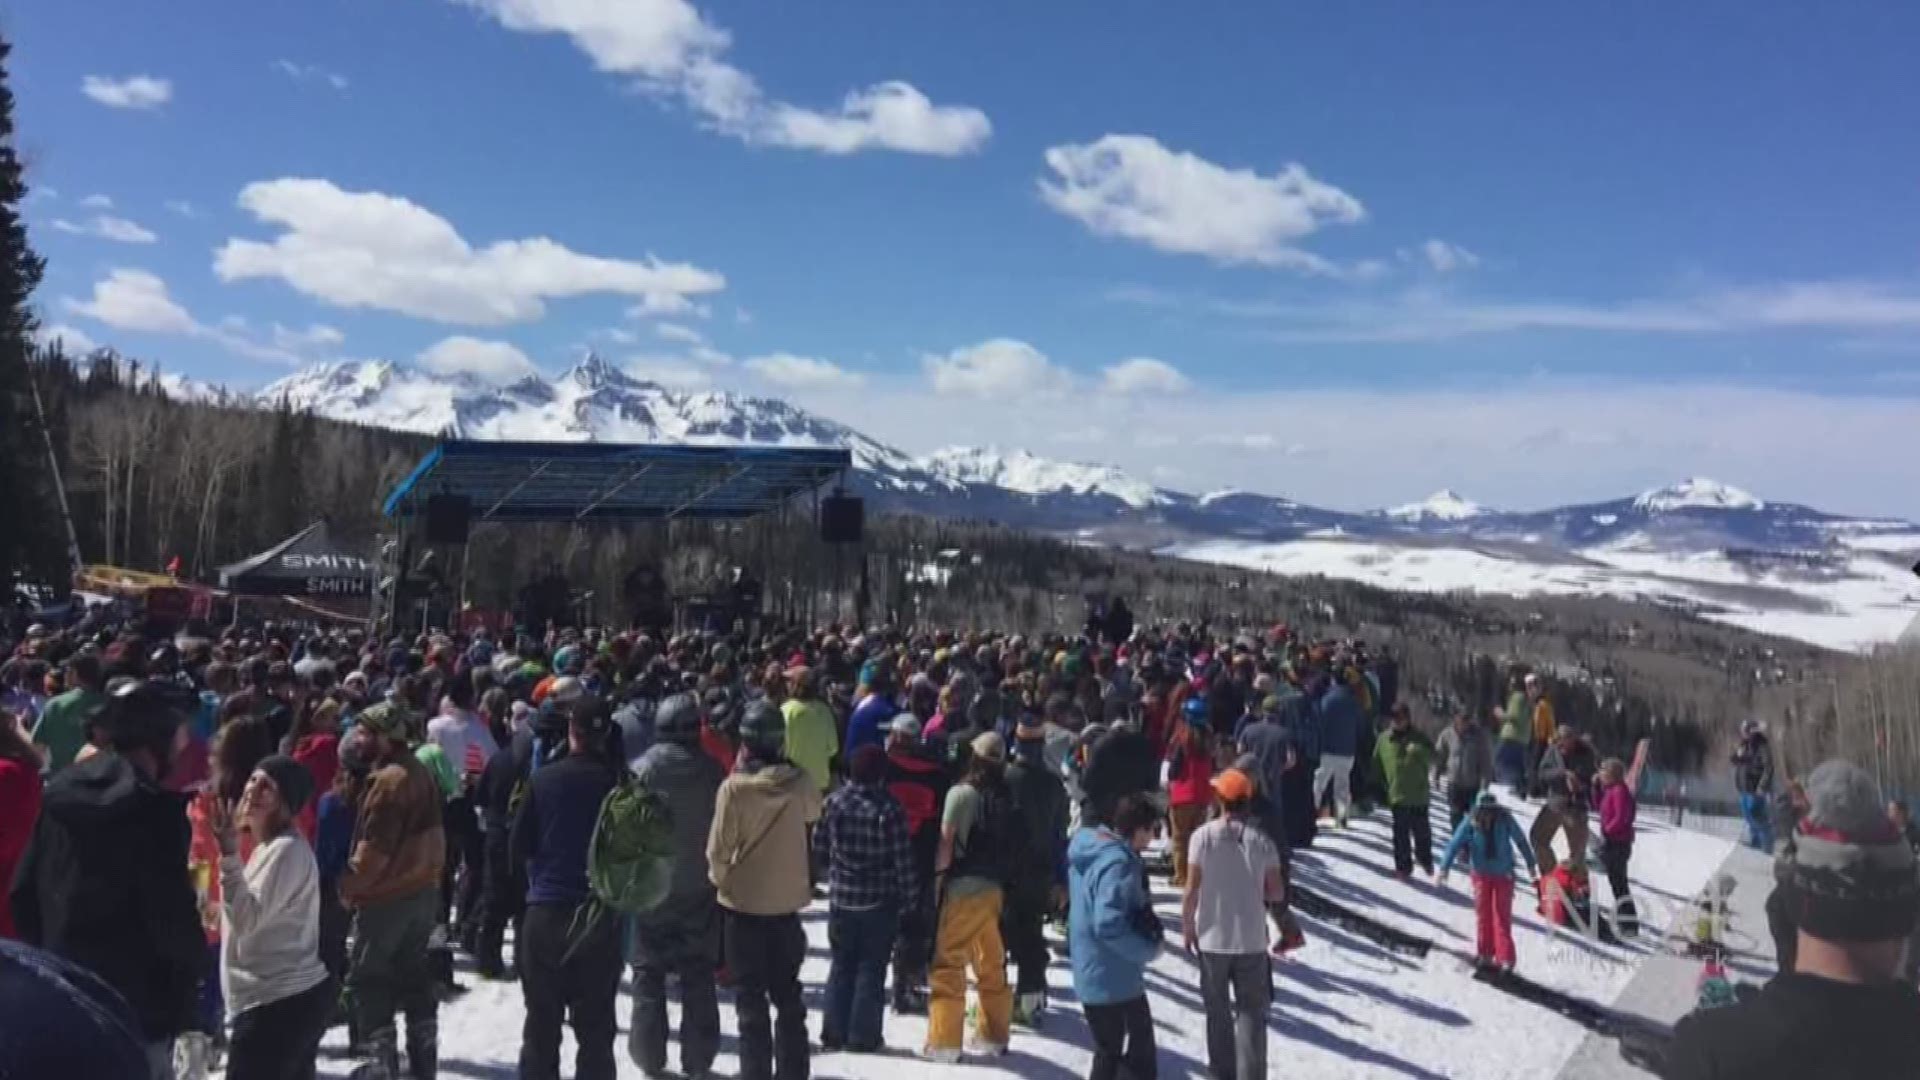 Bill Nershi, one of the founding members of the String Cheese Incident, rocks out in ski boots before a crowd at the base of Telluride Ski Resort.